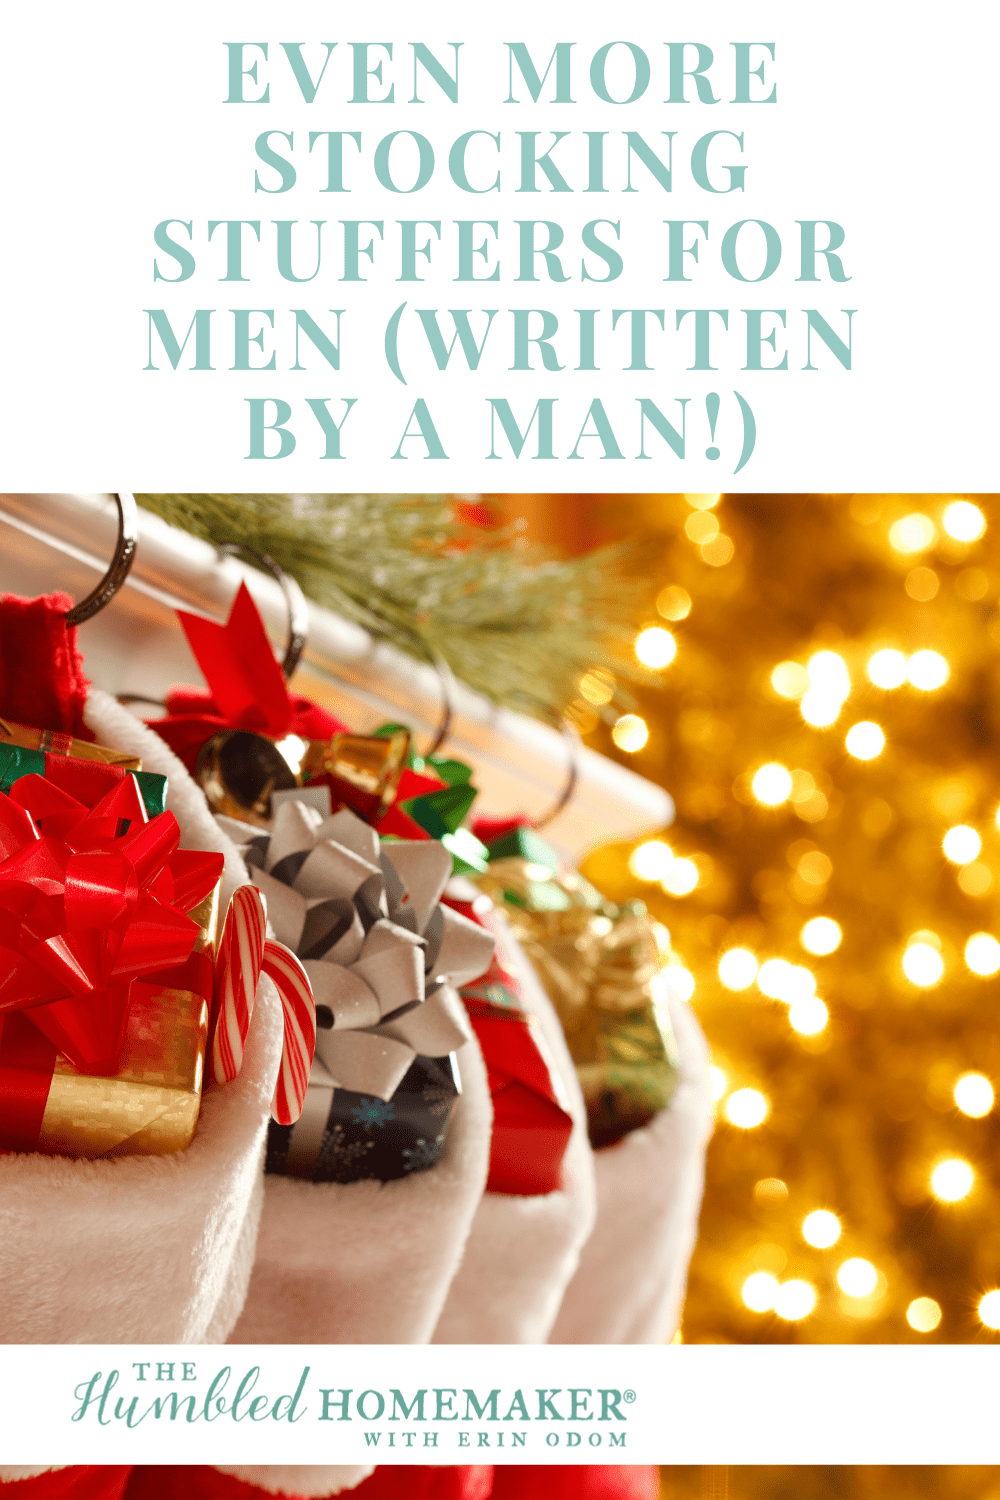 If you're looking for stocking stuffers for men, you've got to read this post! It was written by a man! 